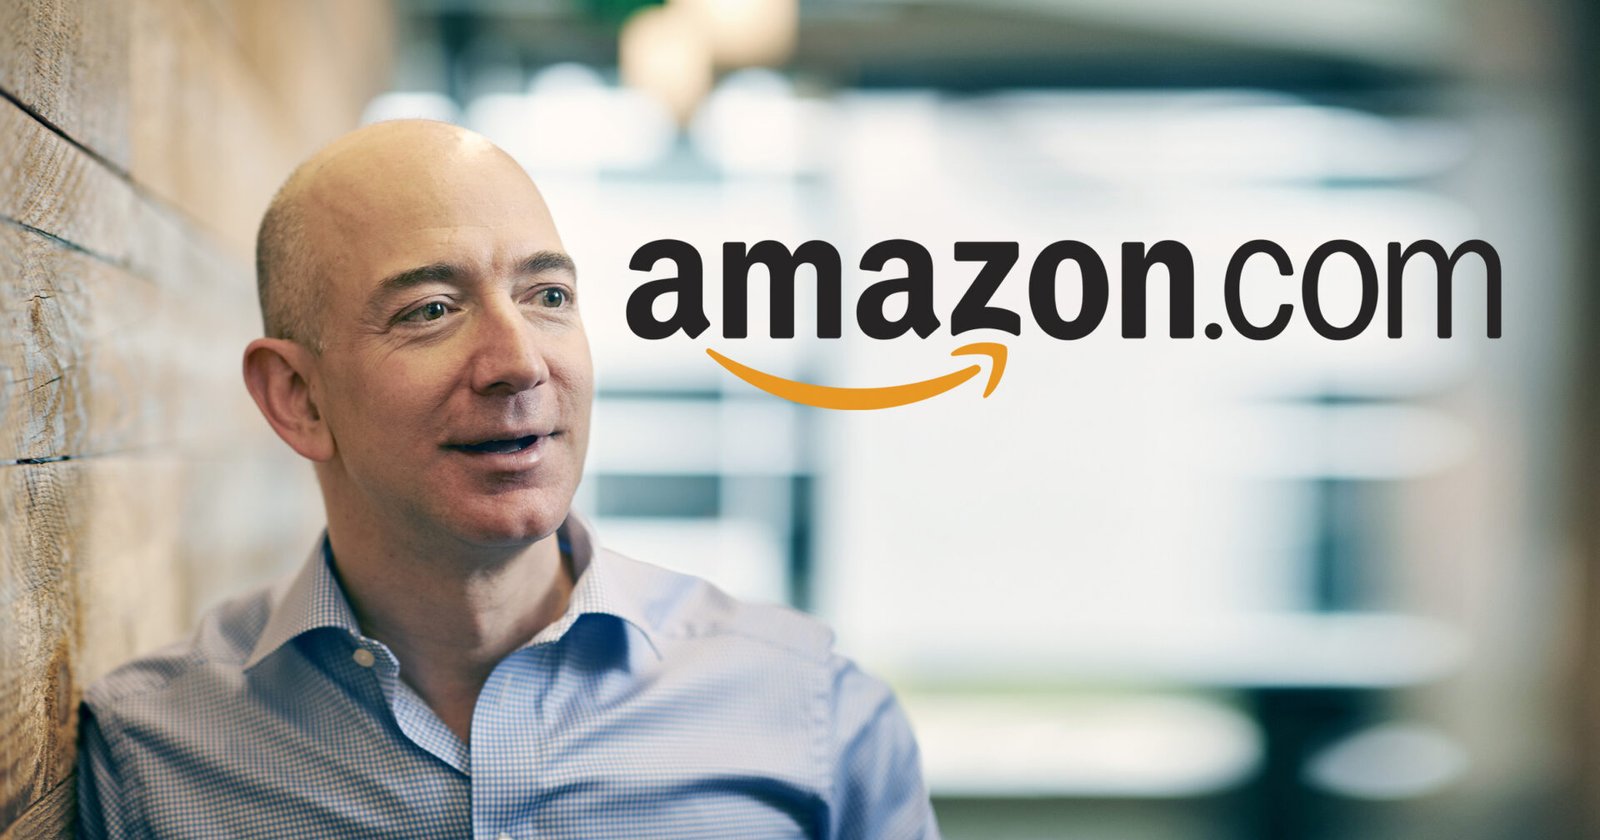 $13 Billion Added in Single Day to Fortune - Jeff Bezos